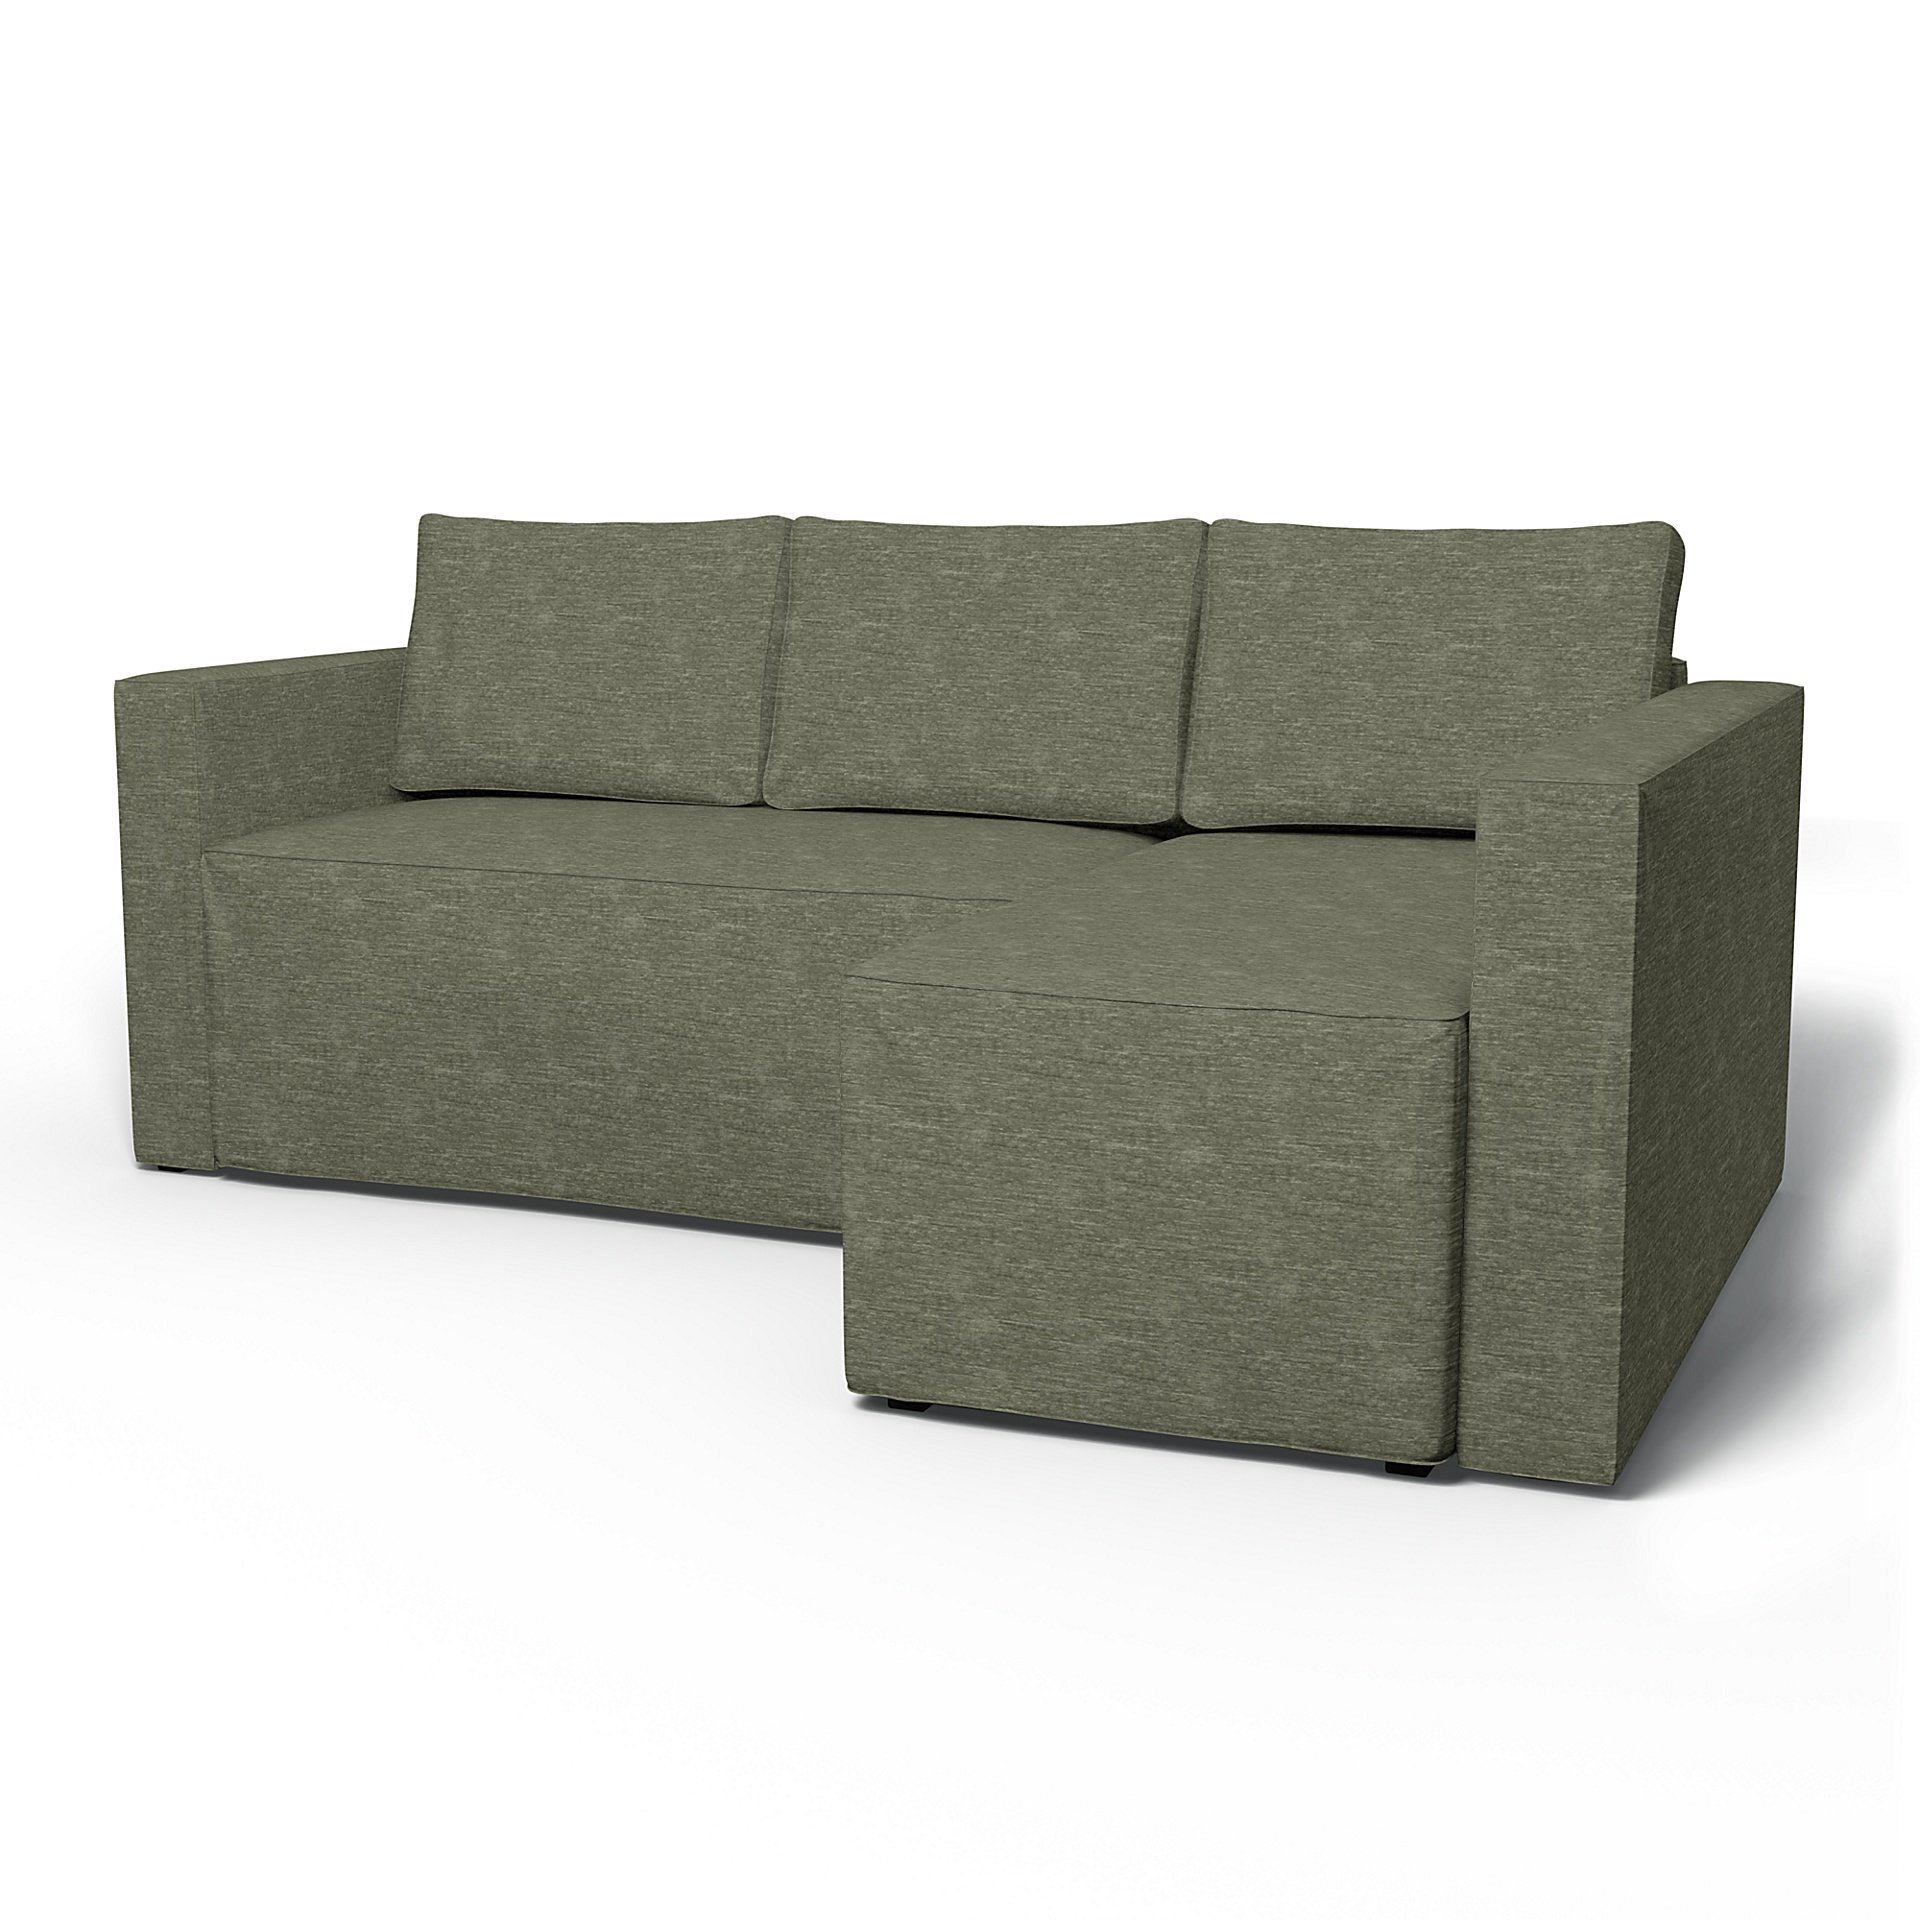 IKEA - Manstad Sofa Bed with Right Chaise Cover, Green Grey, Velvet - Bemz